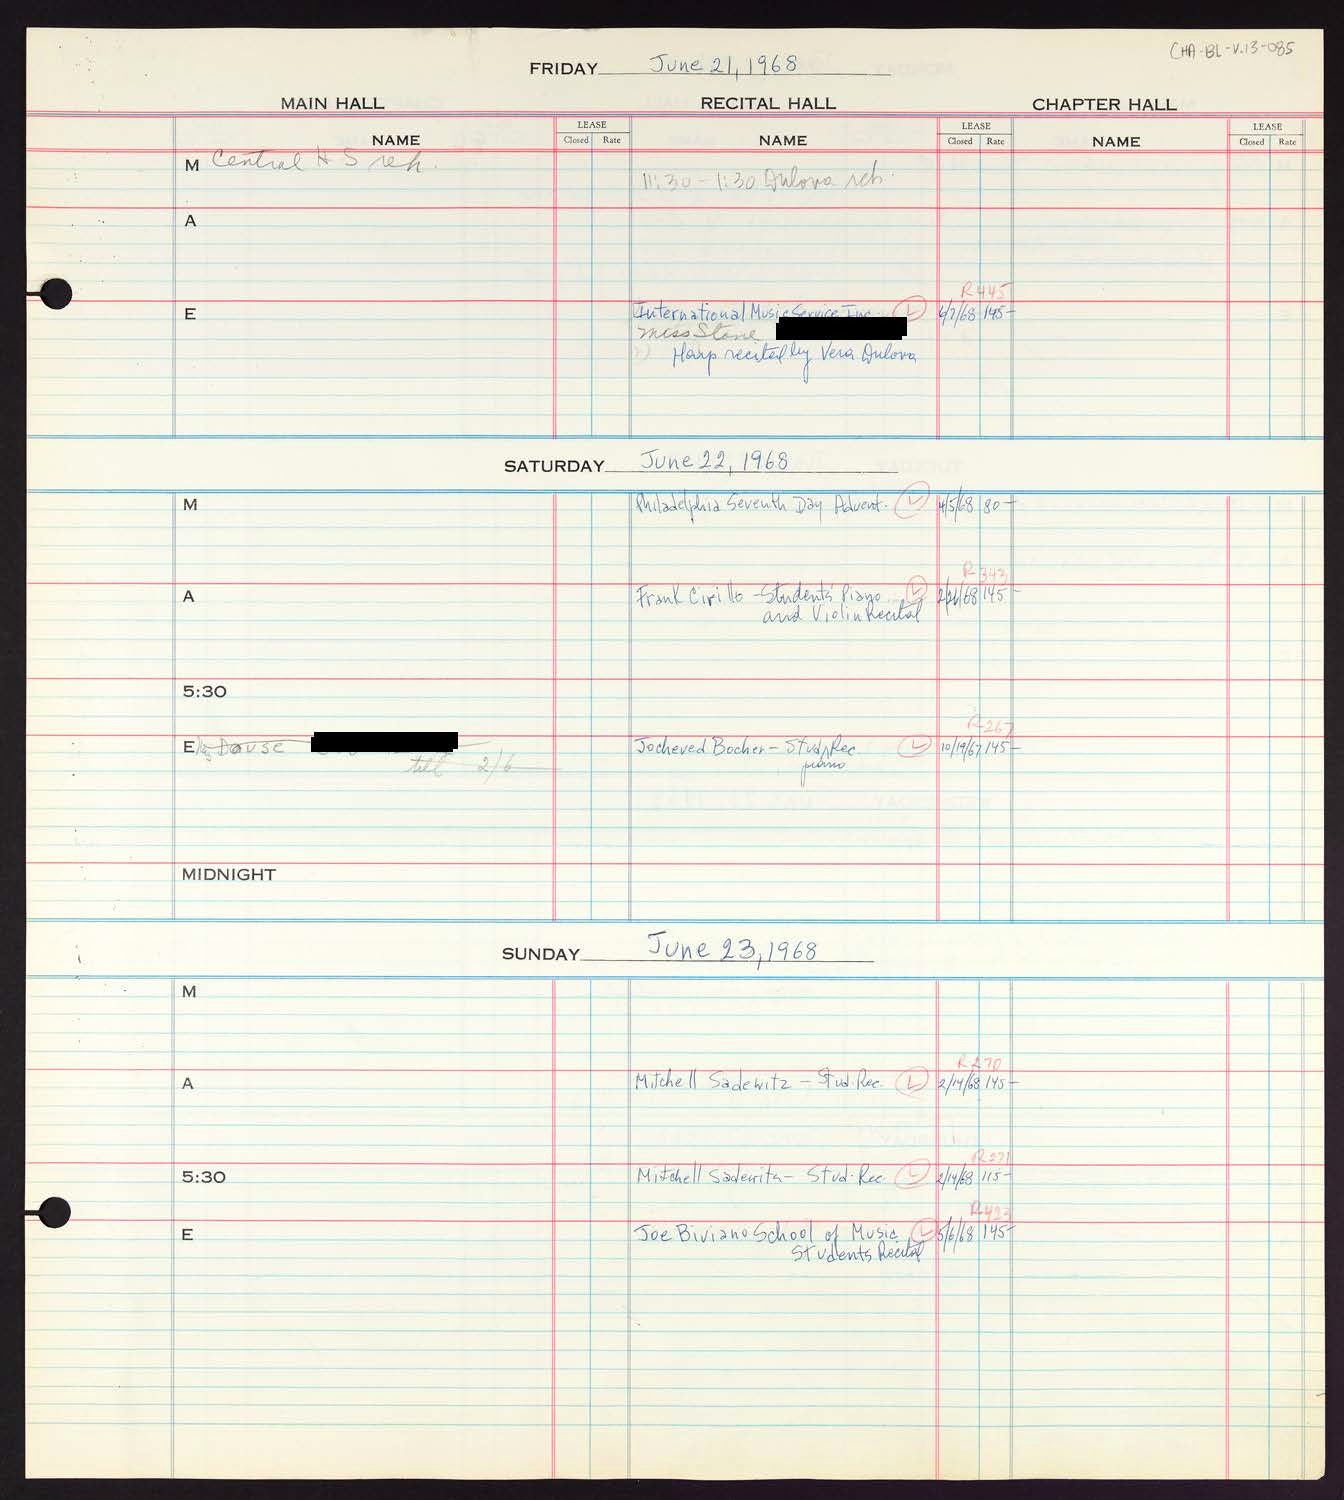 Carnegie Hall Booking Ledger, volume 13, page 85